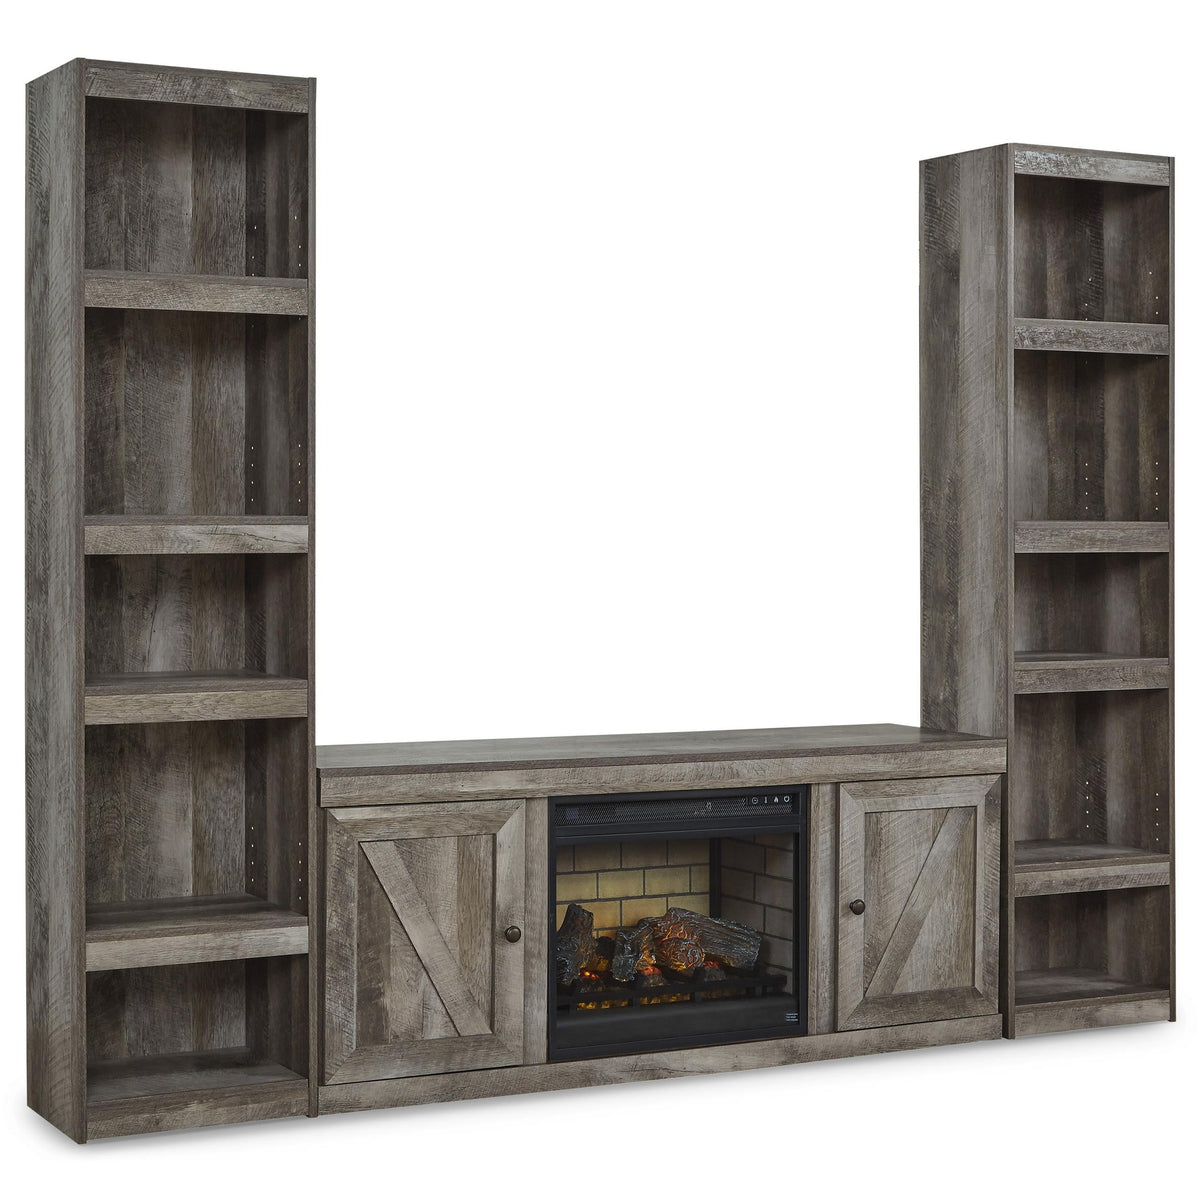 Signature Design by Ashley Wynnlow EW0440W10 3 pc Entertainment Center with Electric Fireplace